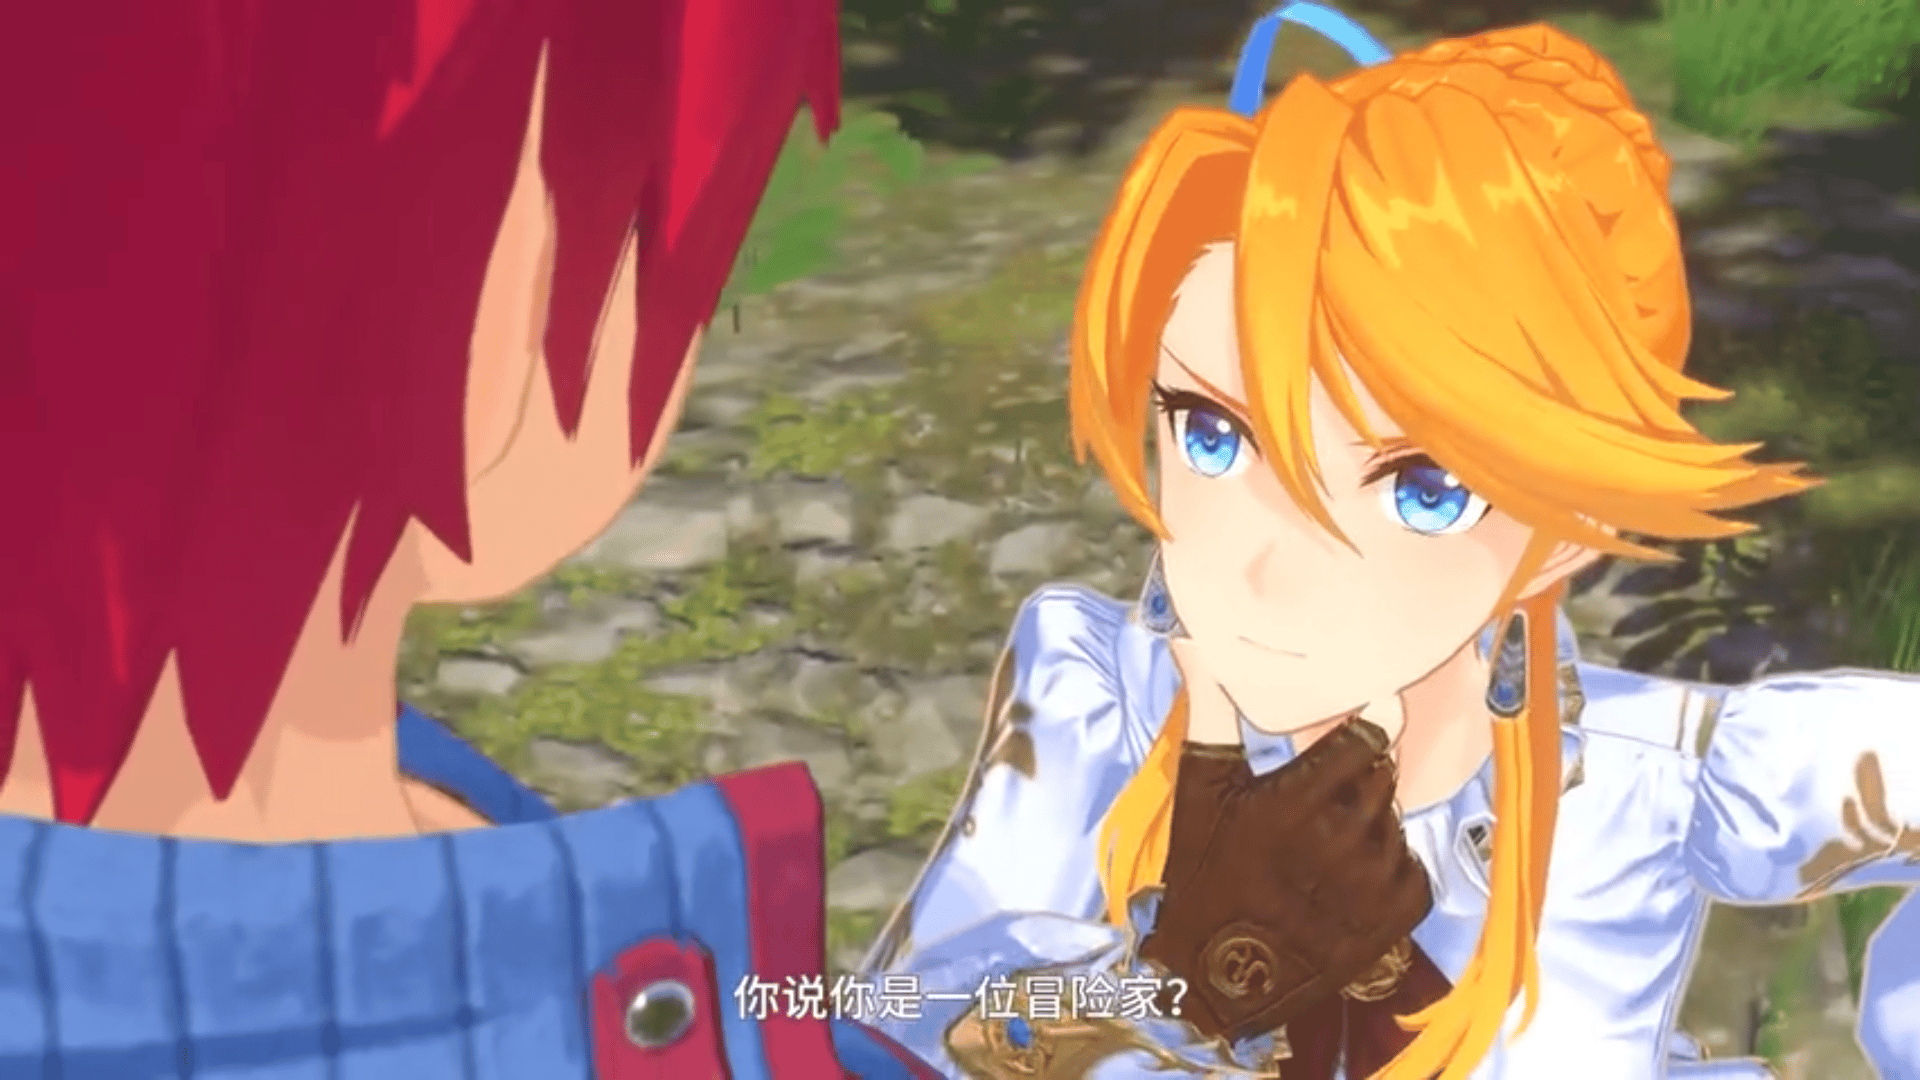 New Ys VIII Online Trailer Reveals 2022 Release Window For iOS & Android